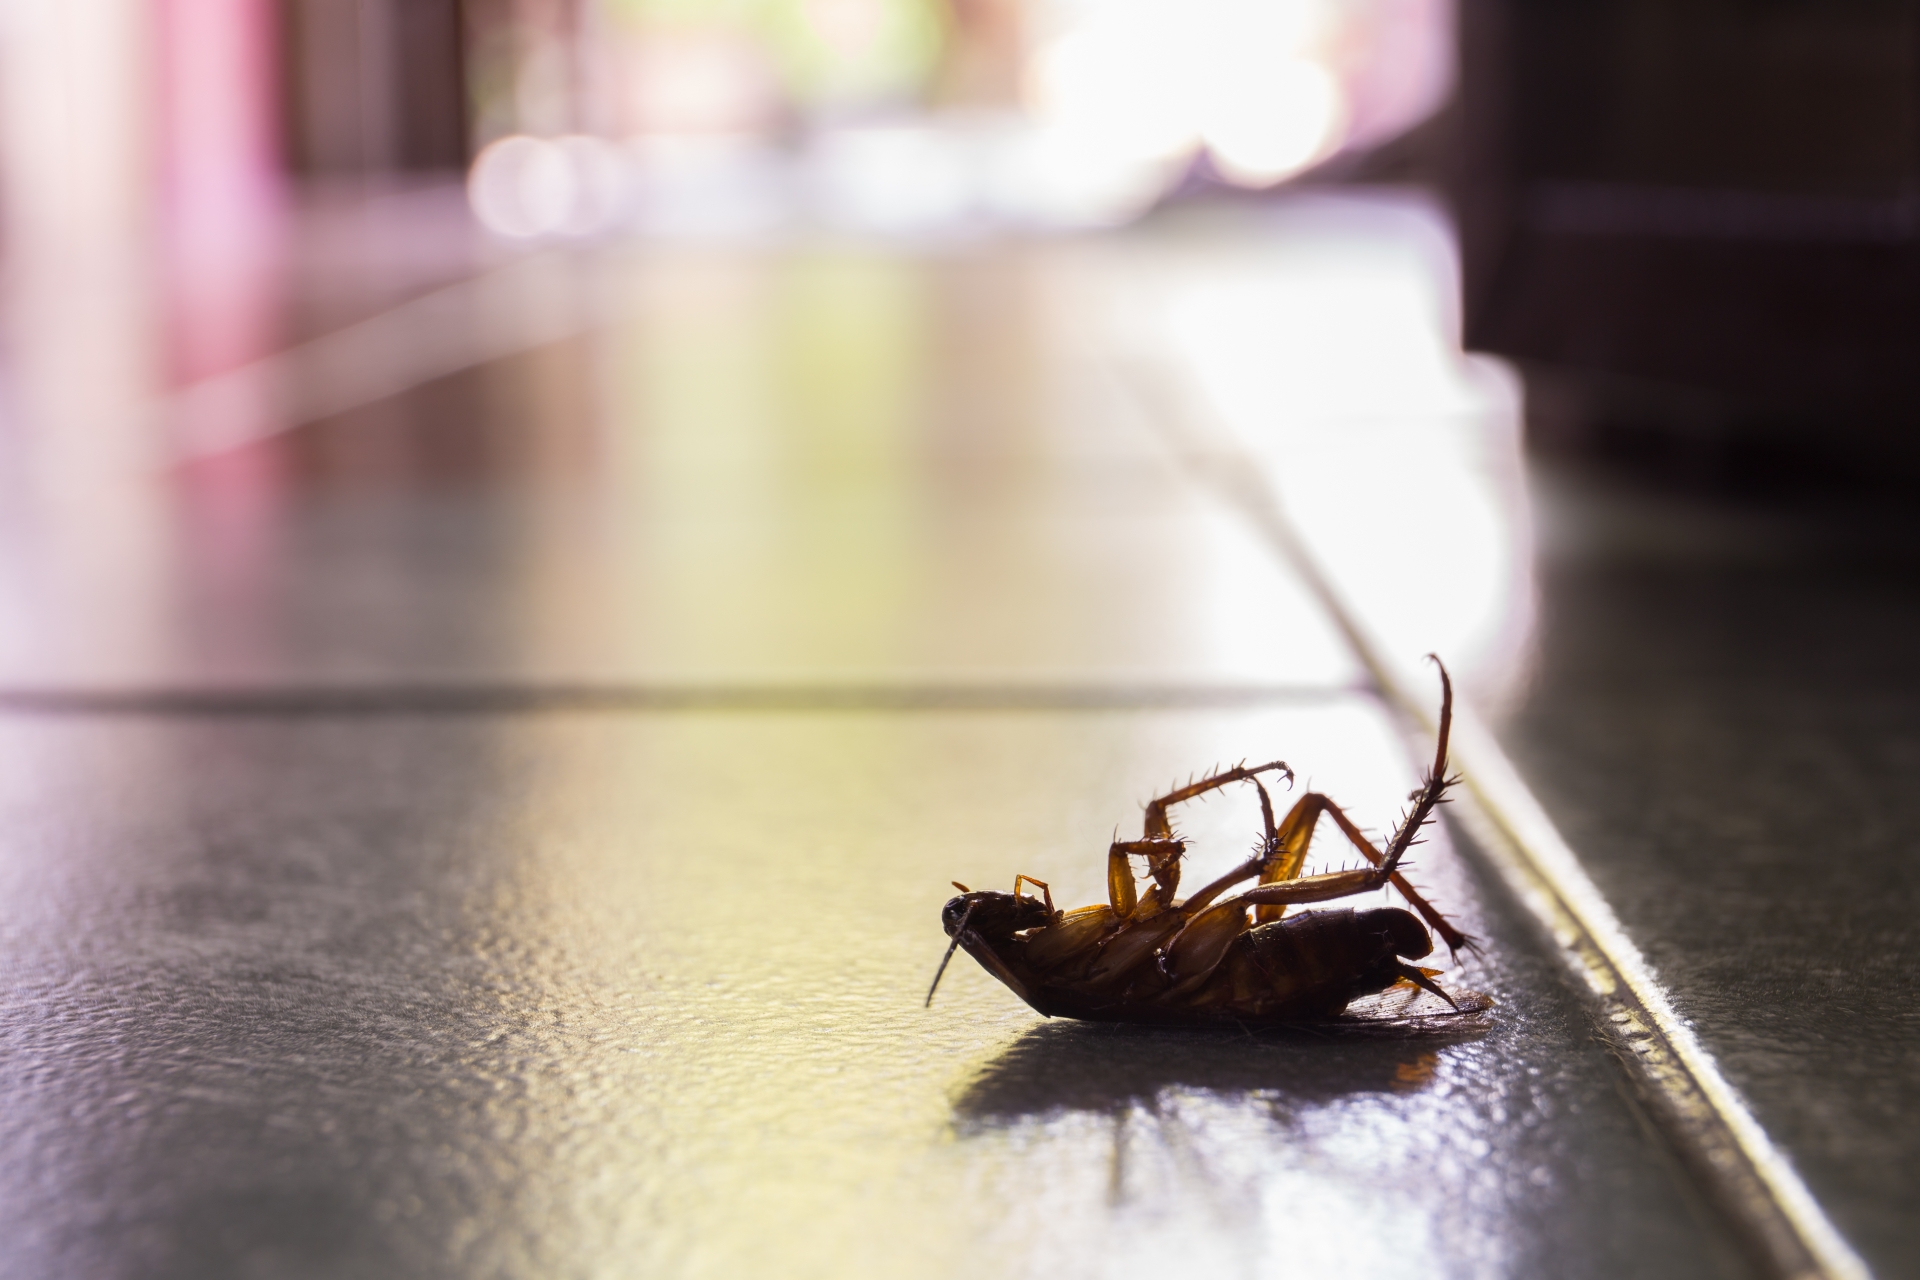 Cockroach Control, Pest Control in Upper Edmonton, N18. Call Now 020 8166 9746